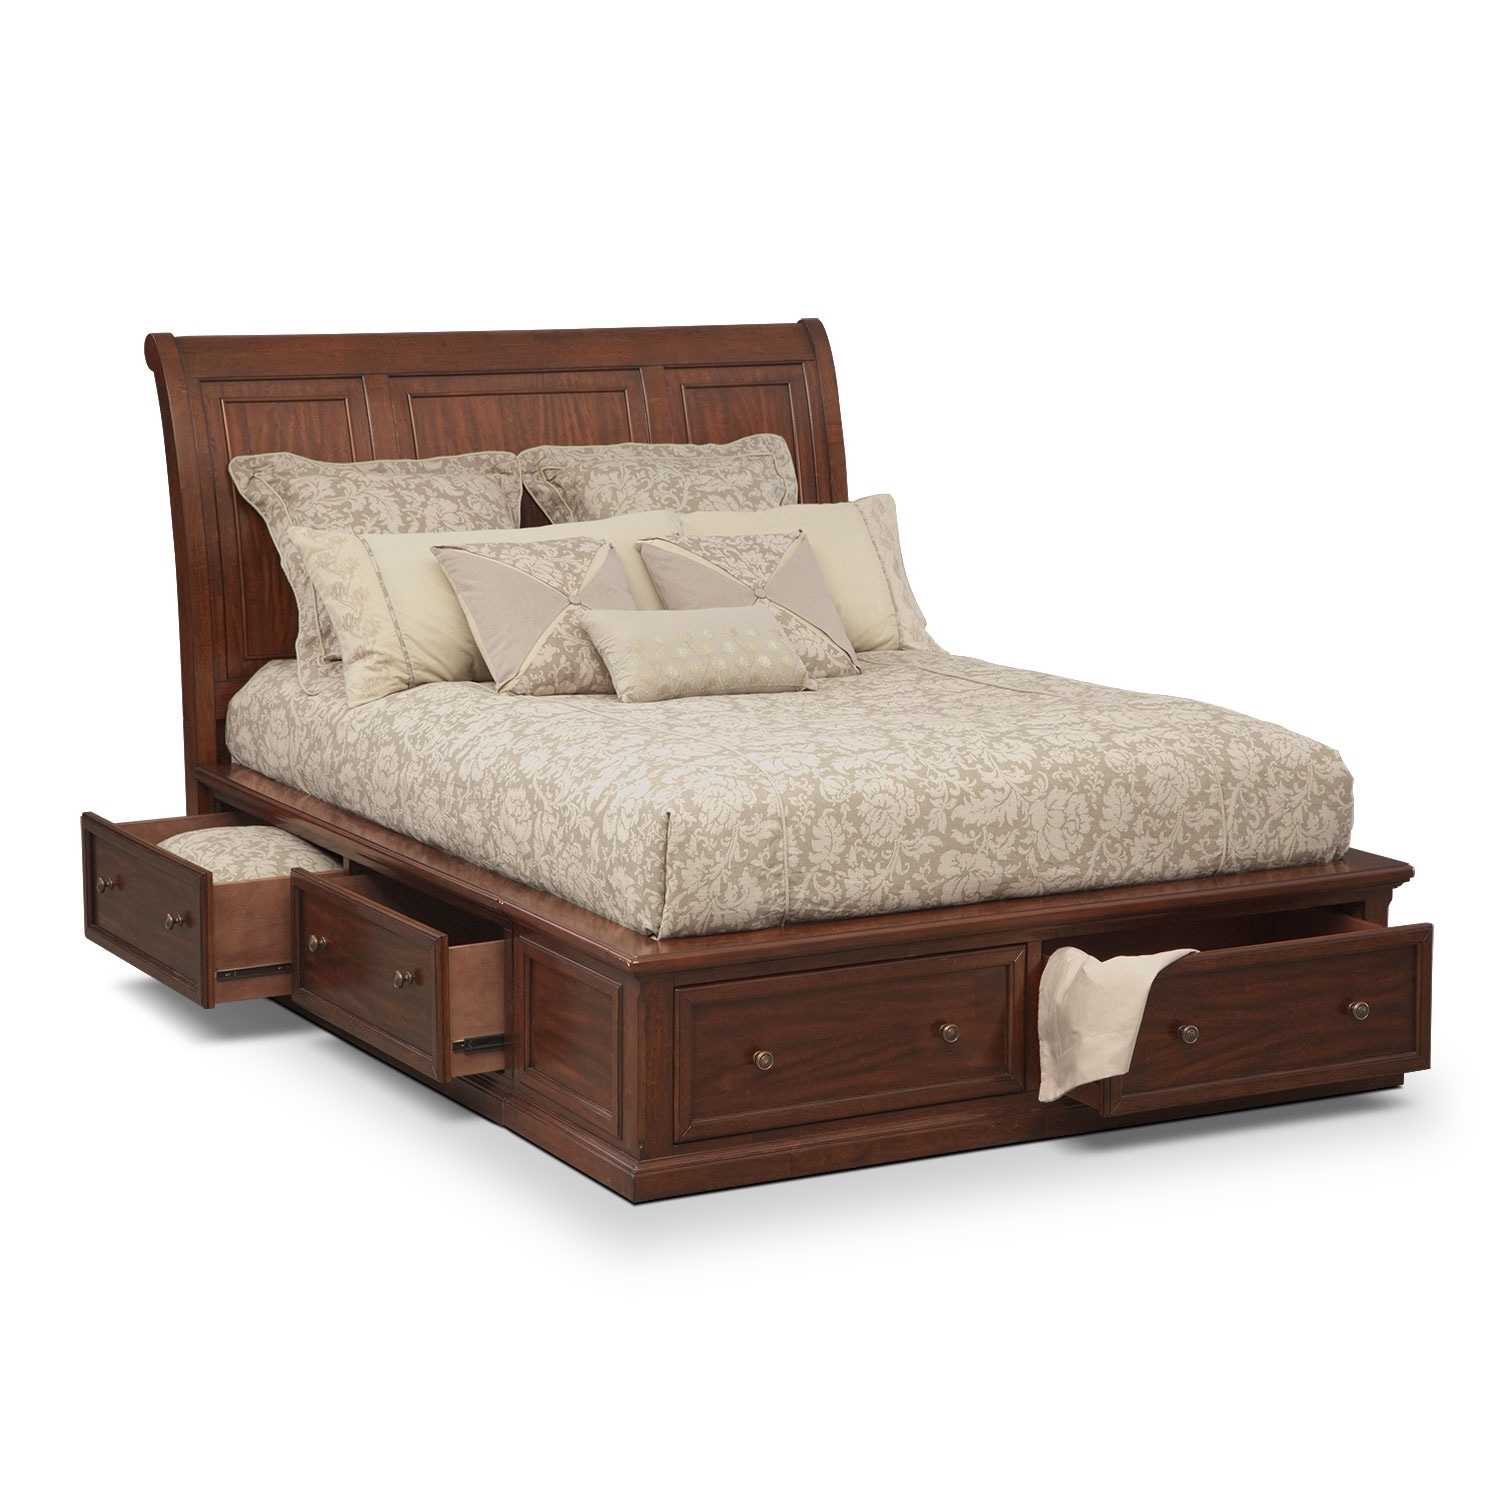 Hanover Storage Bed | Value City Furniture and Mattresses